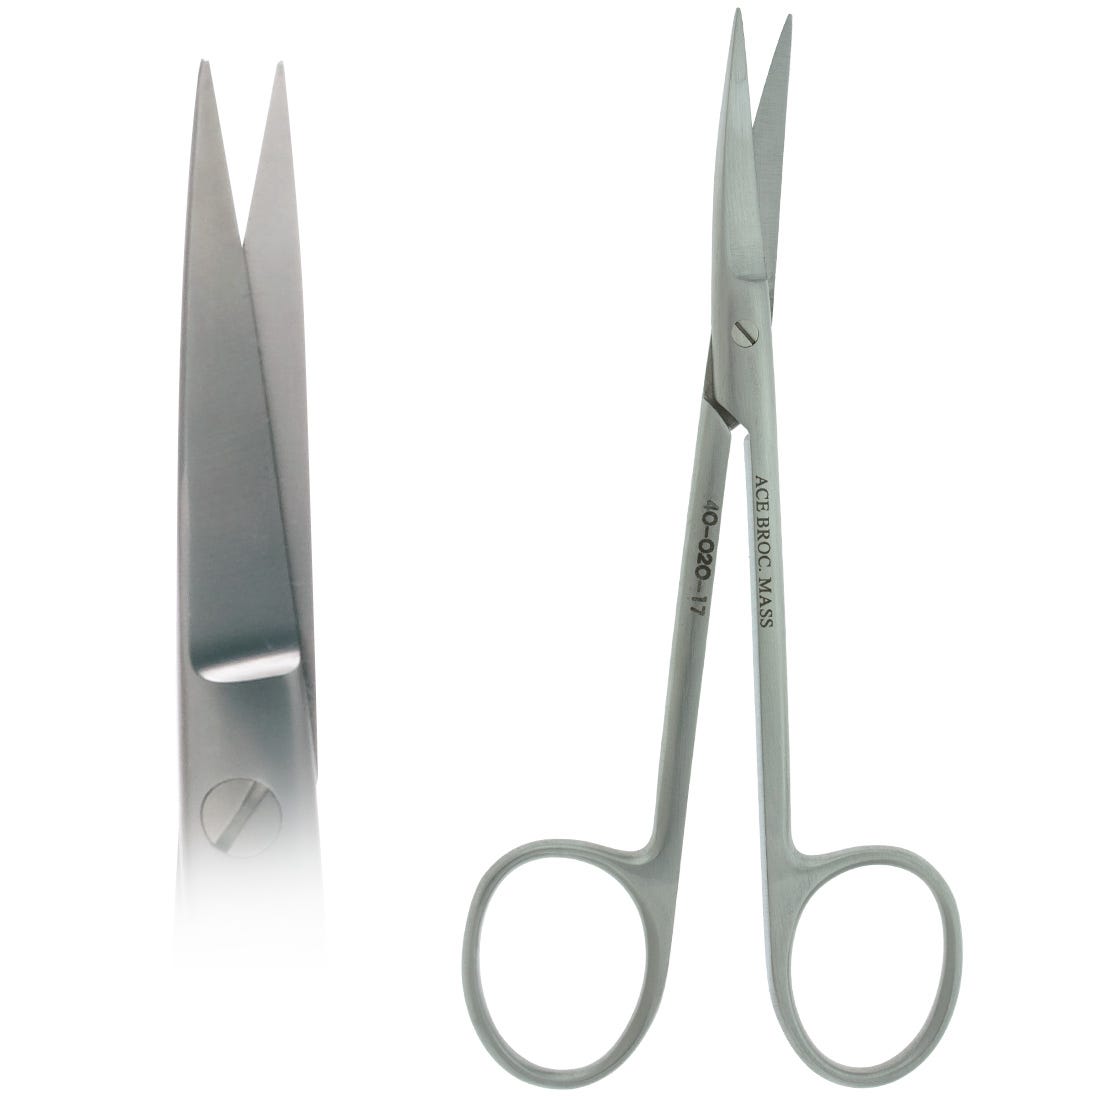 ACE #6 Wagner Scissors, curved, delicate